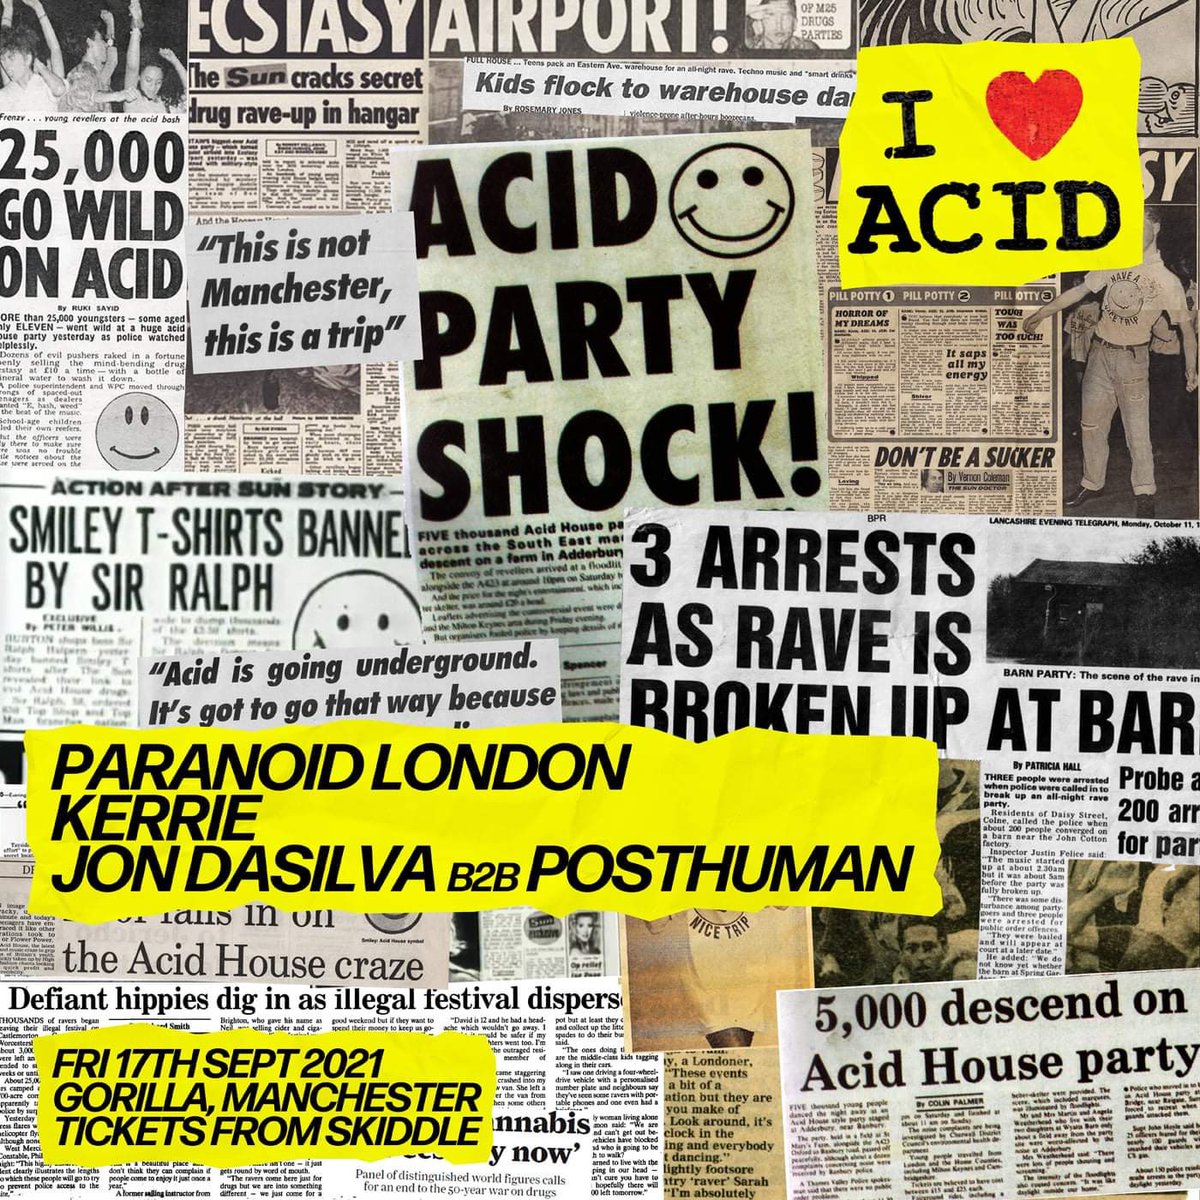 The next I Love Acid is coming up on the 17th Sep at @thisisgorilla MCR 🐝 catch @posthuman @jondasilva & @paranoidlondon & myself - hope to see some local heads there! 🥳
tix available via Skiddle